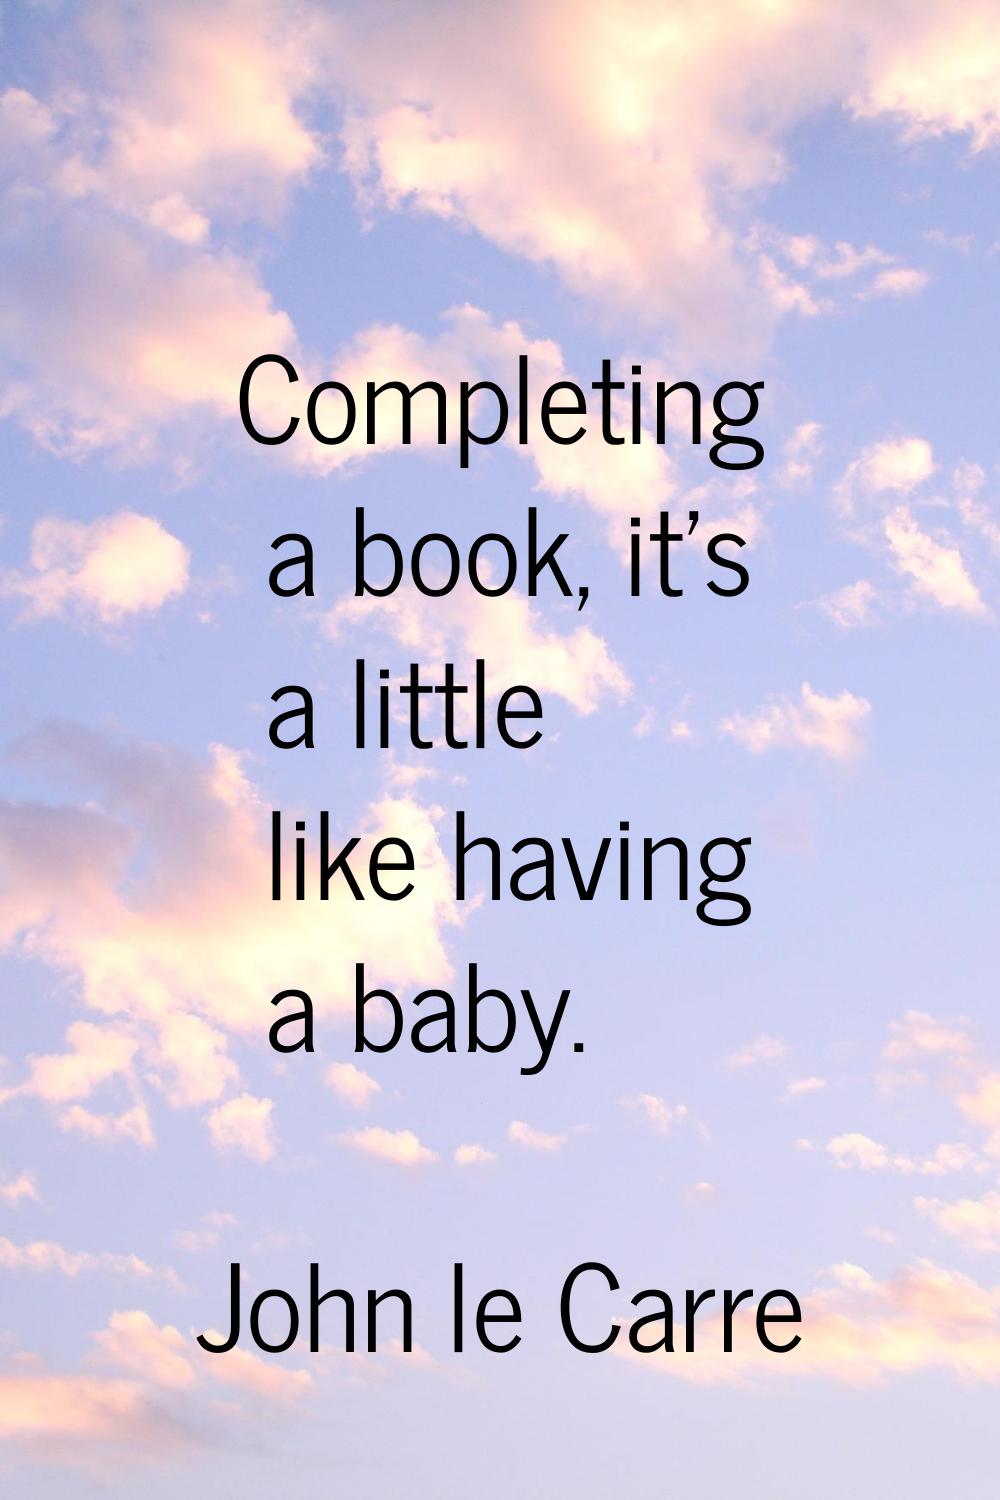 Completing a book, it's a little like having a baby.